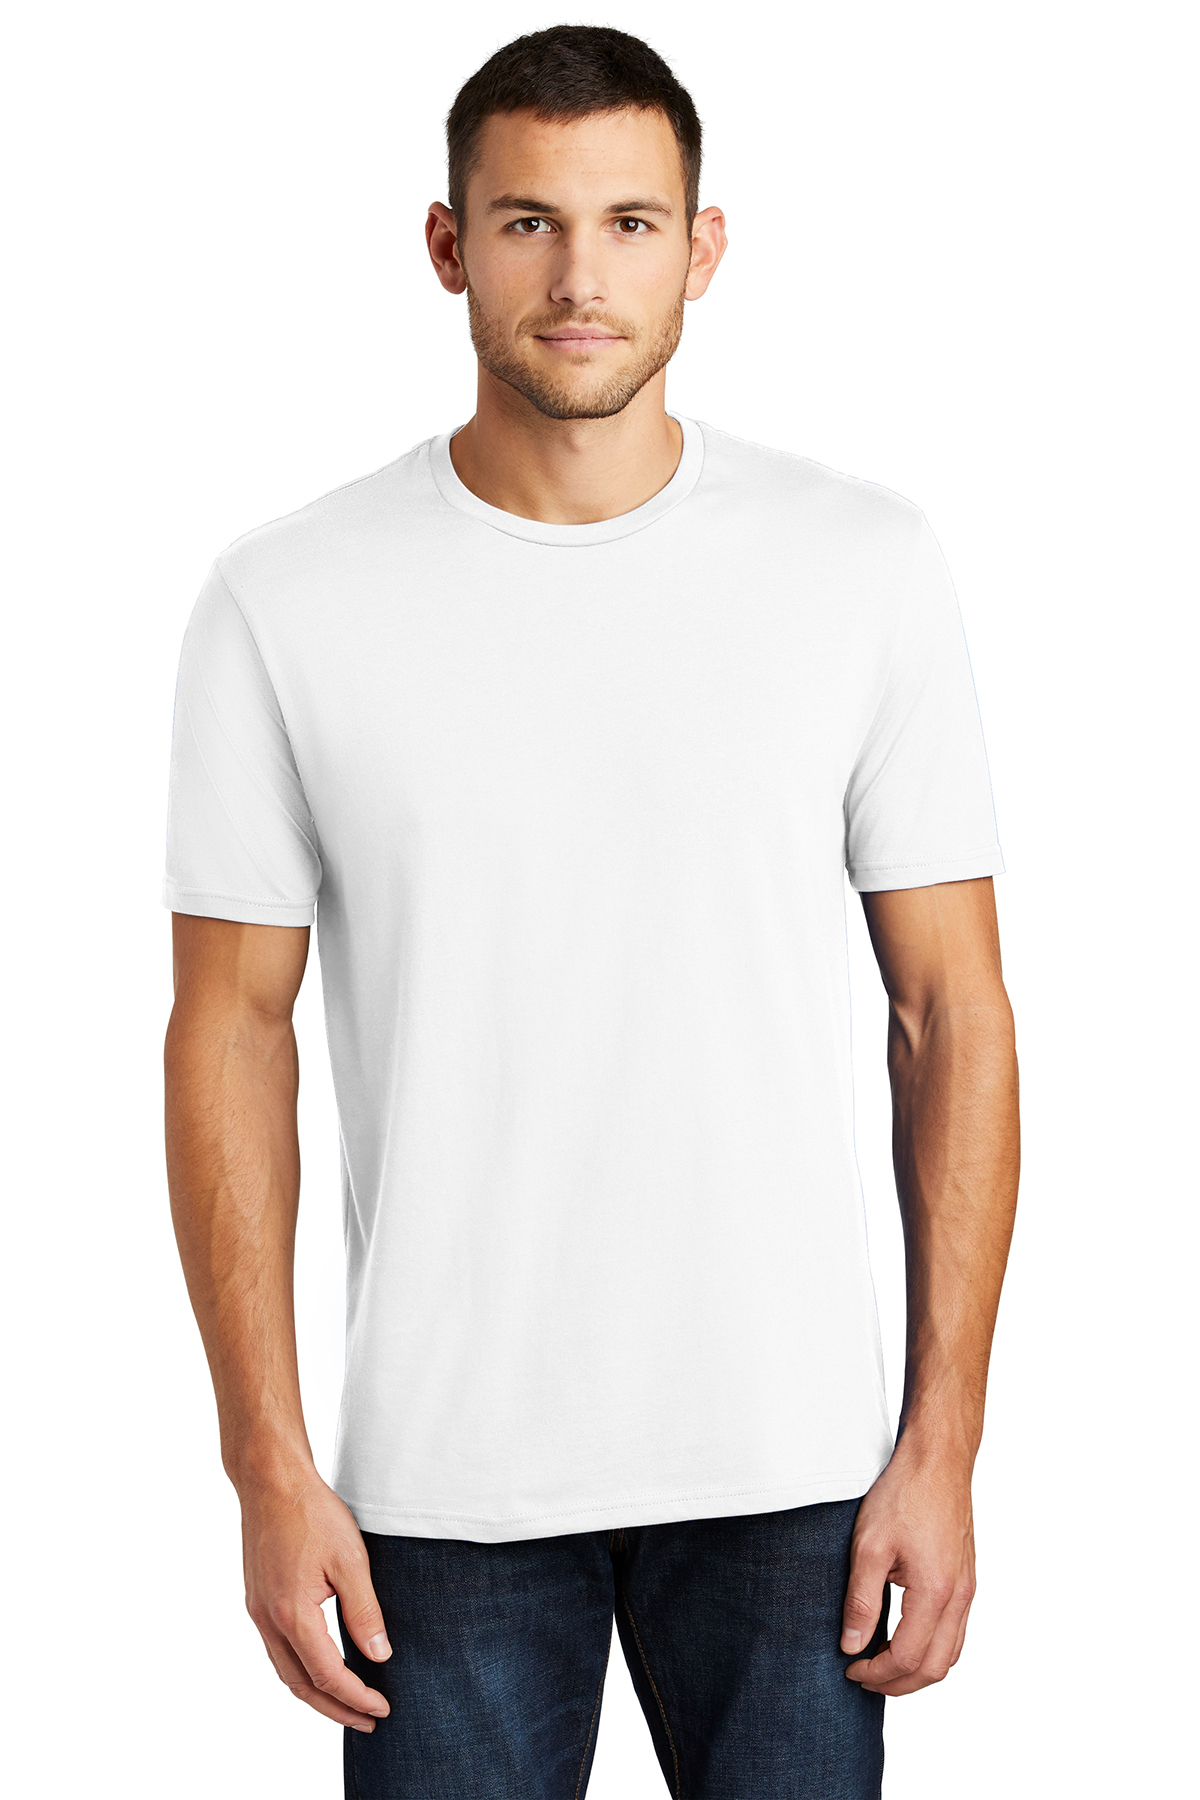 District Threads DT104 Mens Perfect Weight District Tee. - T-Shirts